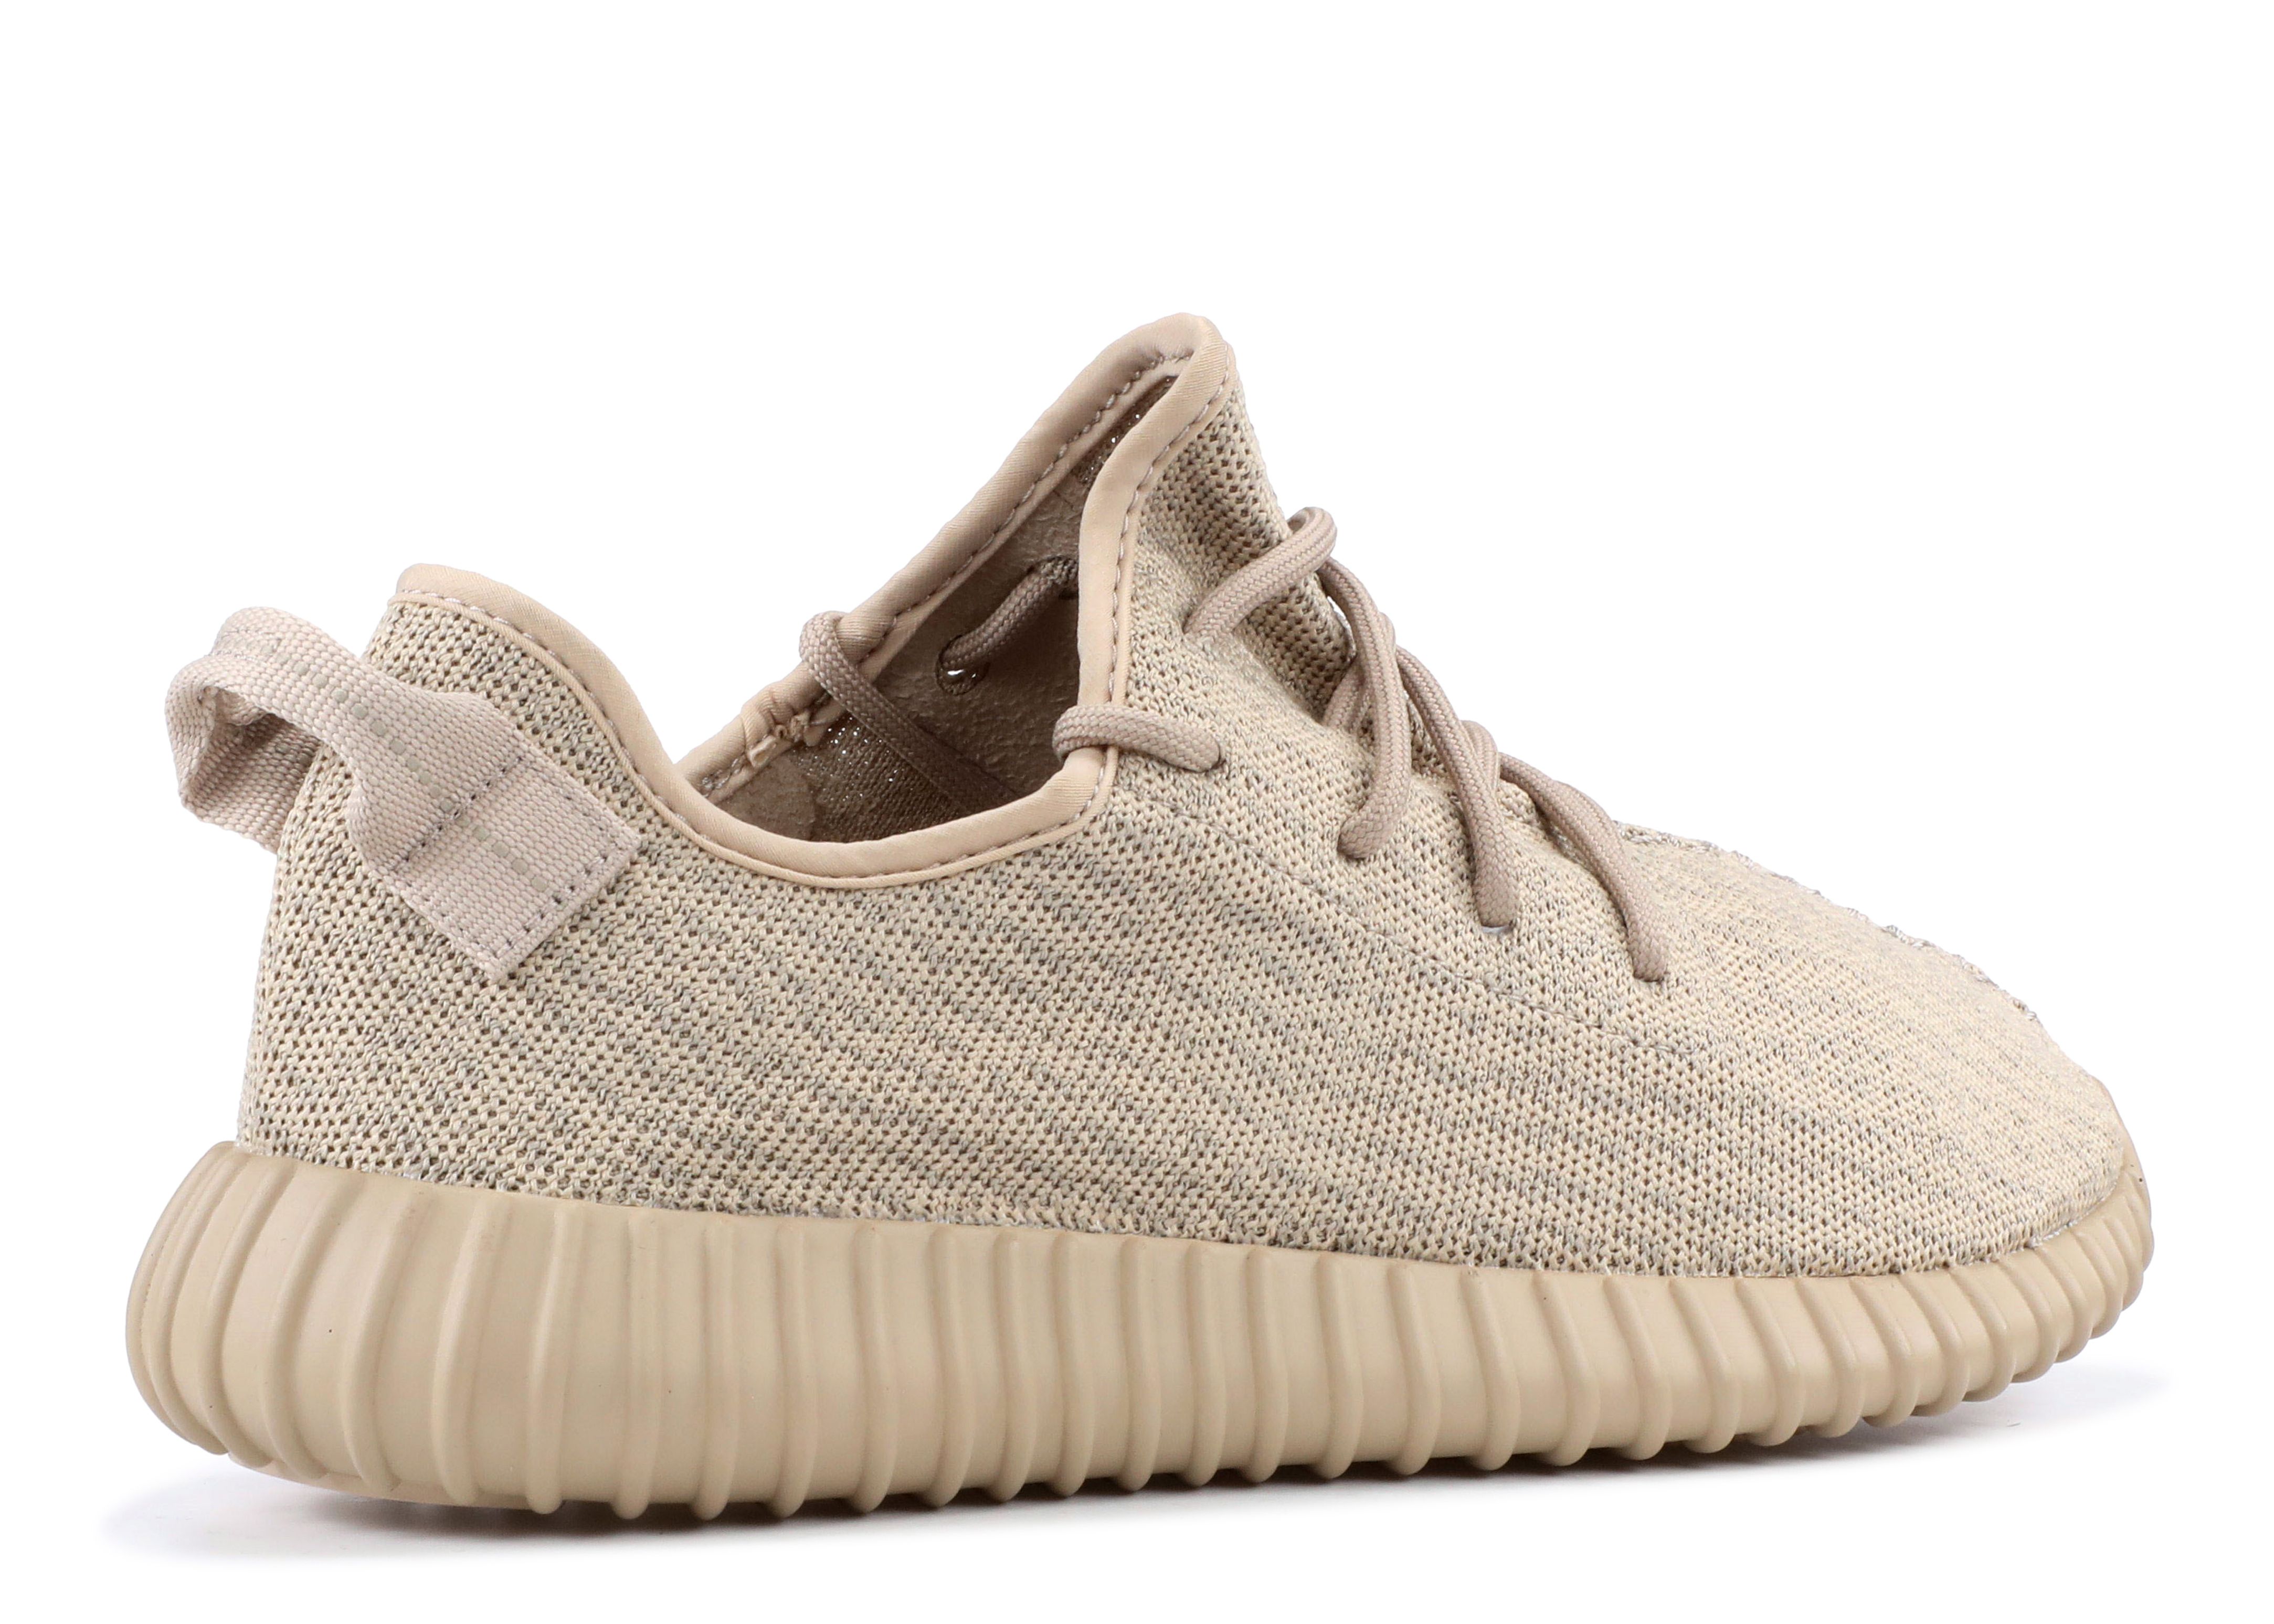 UA Yeezy 350 Boost for Sale! More adidas Shoes Found!